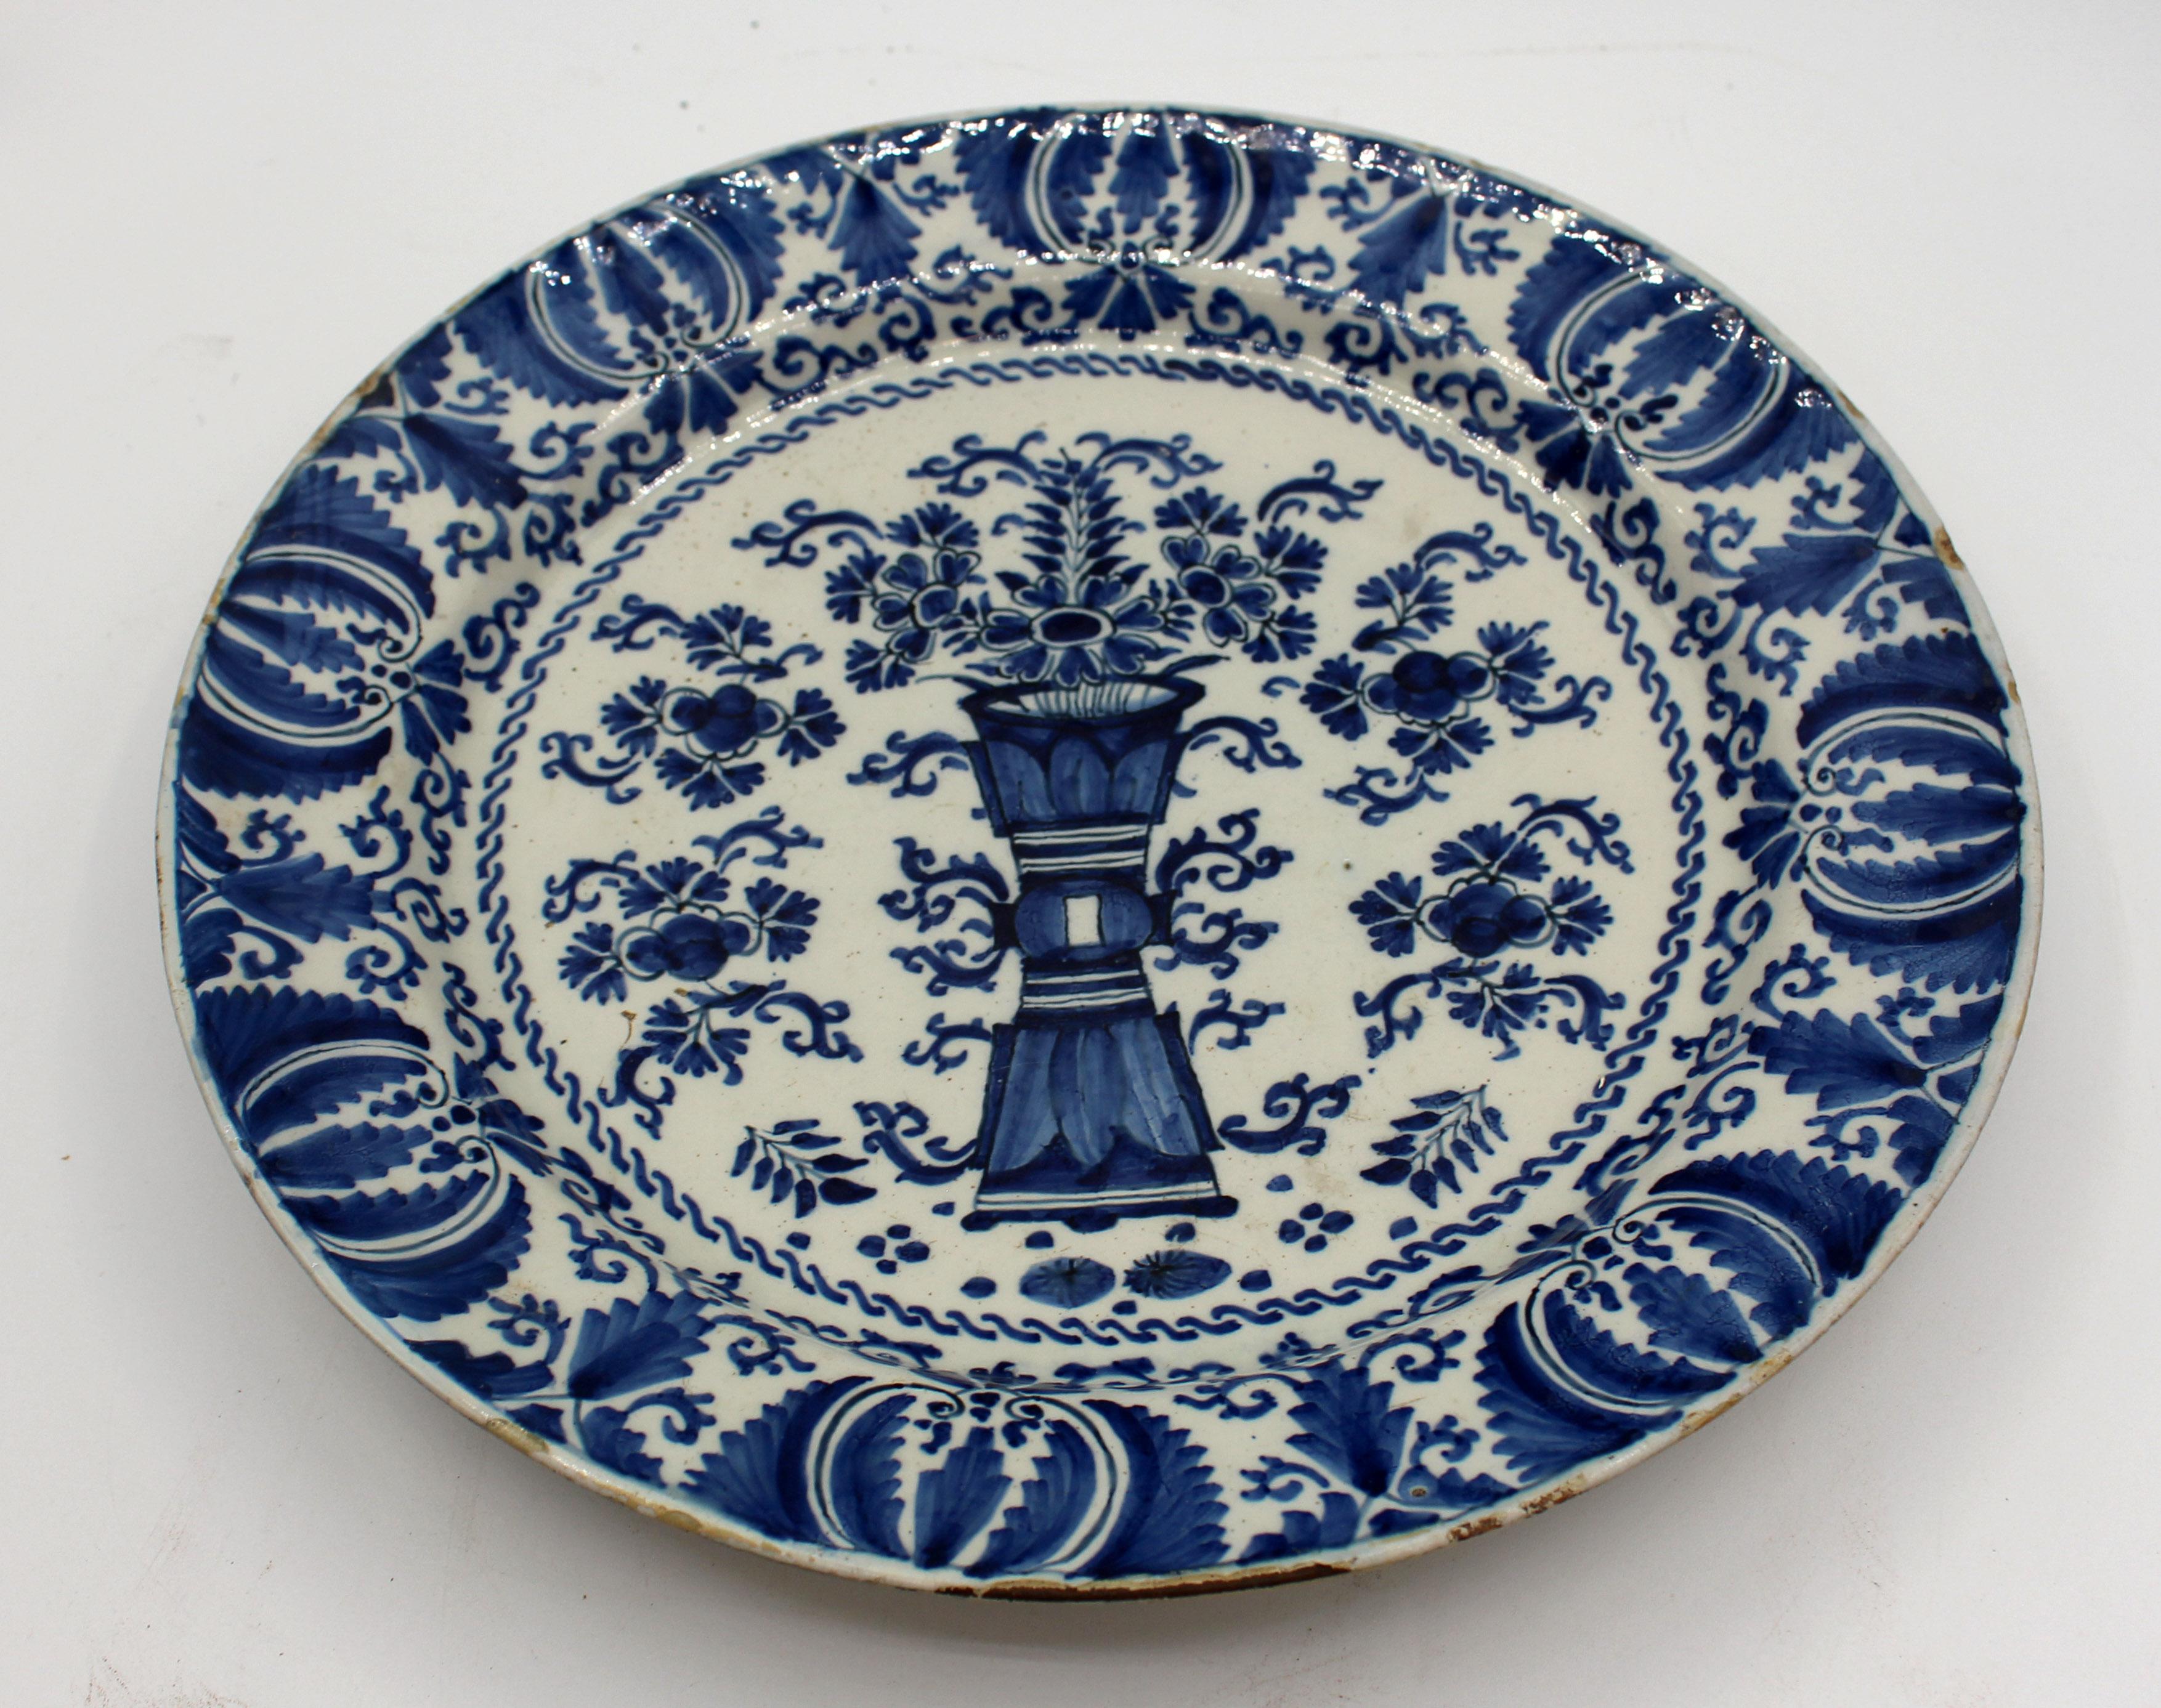 Late 18th century Delft blue & white chop plate. Central tall, pinched waist, cylindrical vase with flowers surrounded by flowers. Extensive alternating naturalistic motif border. Typical chips & frits for material, age & use. 11.75